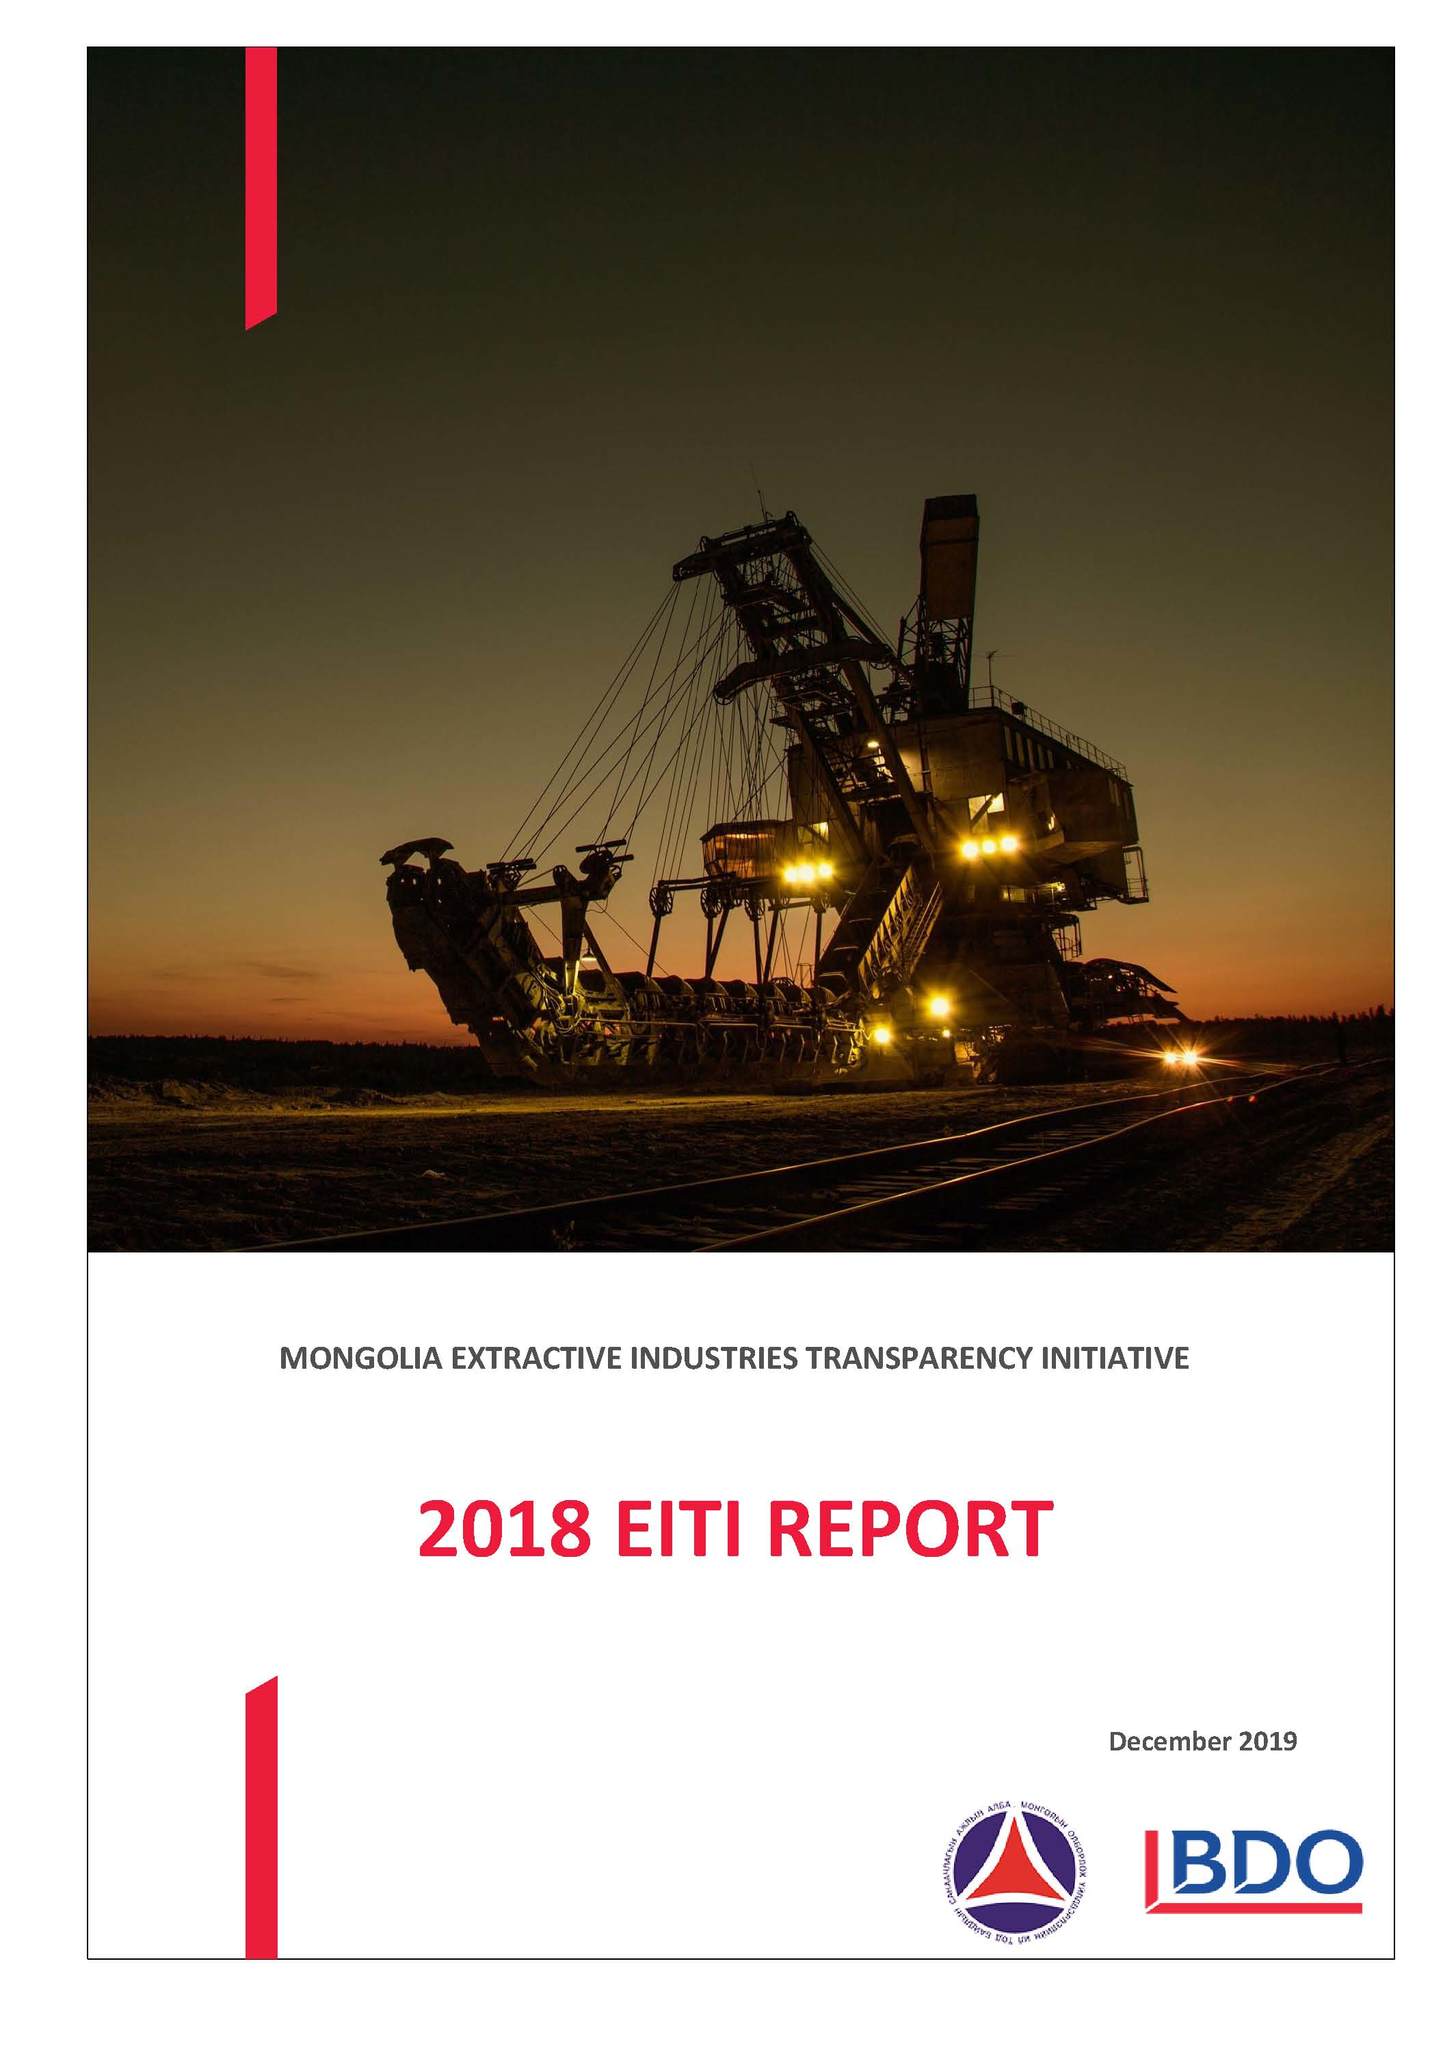 MONGOLIA EXTRACTIVE INDUSTRIES TRANSPARENCY INITIATIVE